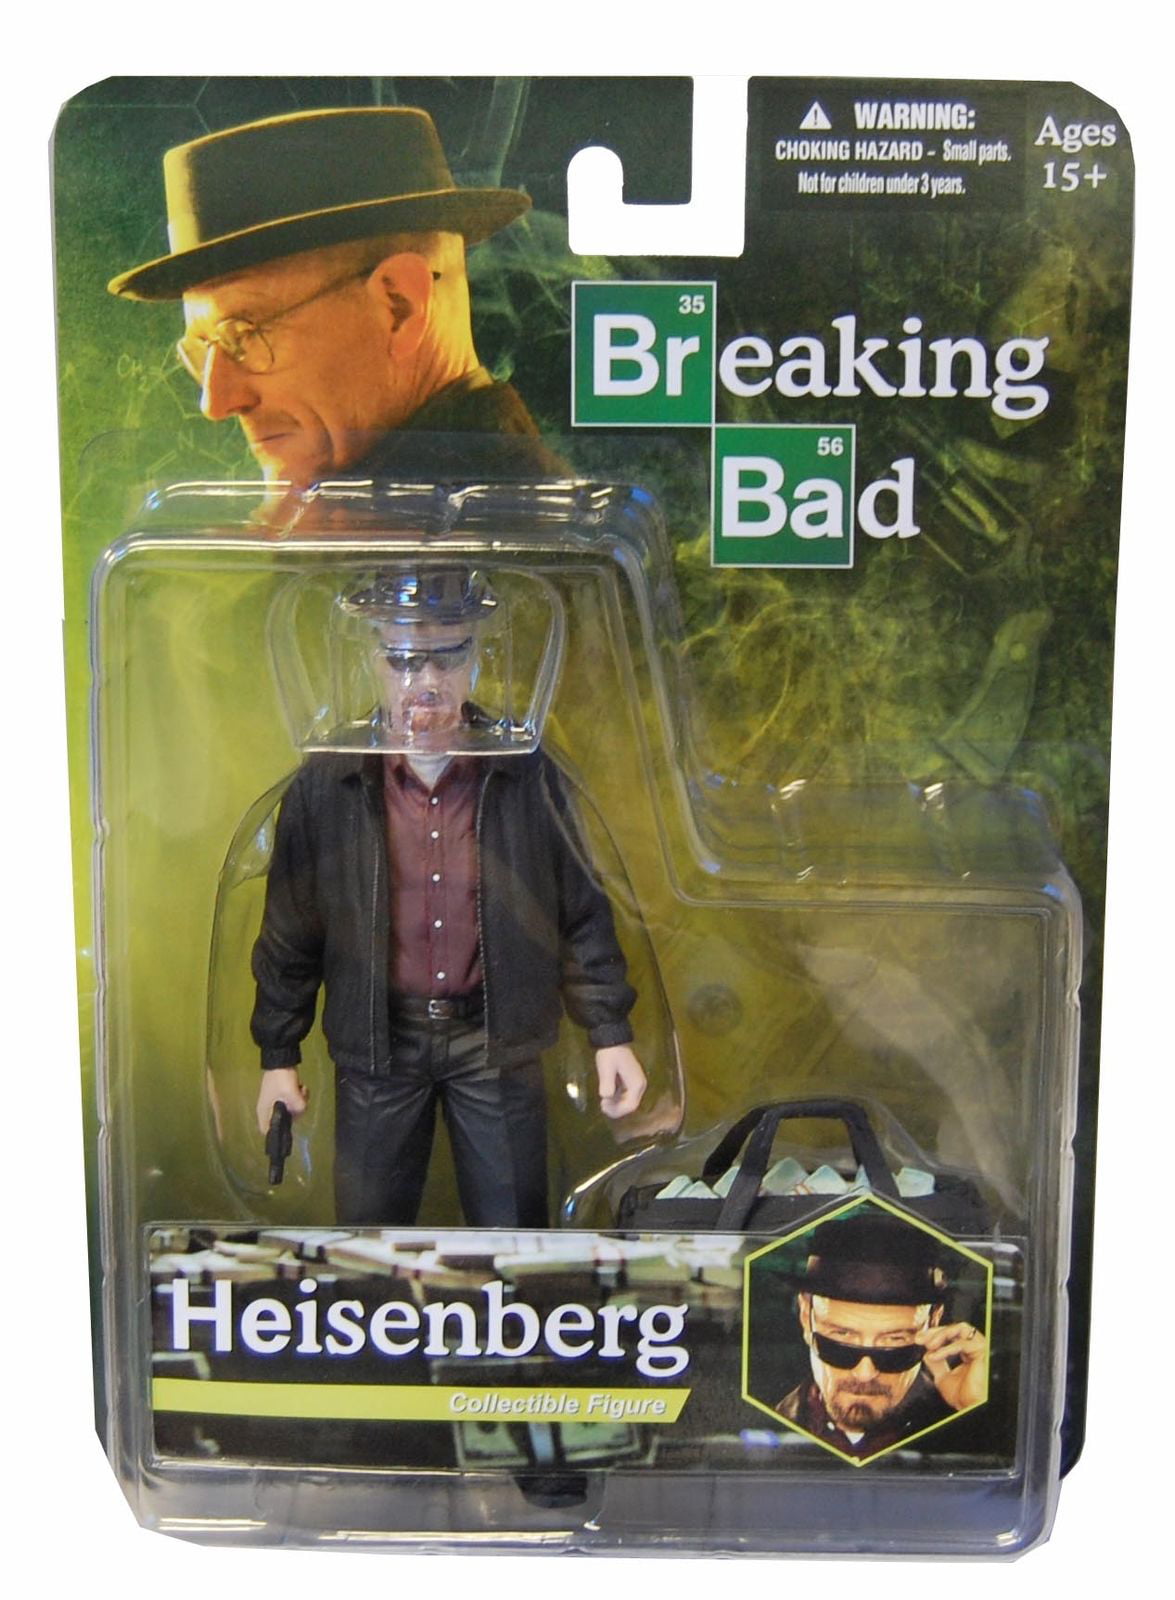 Details about   Breaking Bad Mezco Walter White Heisenberg & Jesse Pinkman 6" Figures PX Excl. 